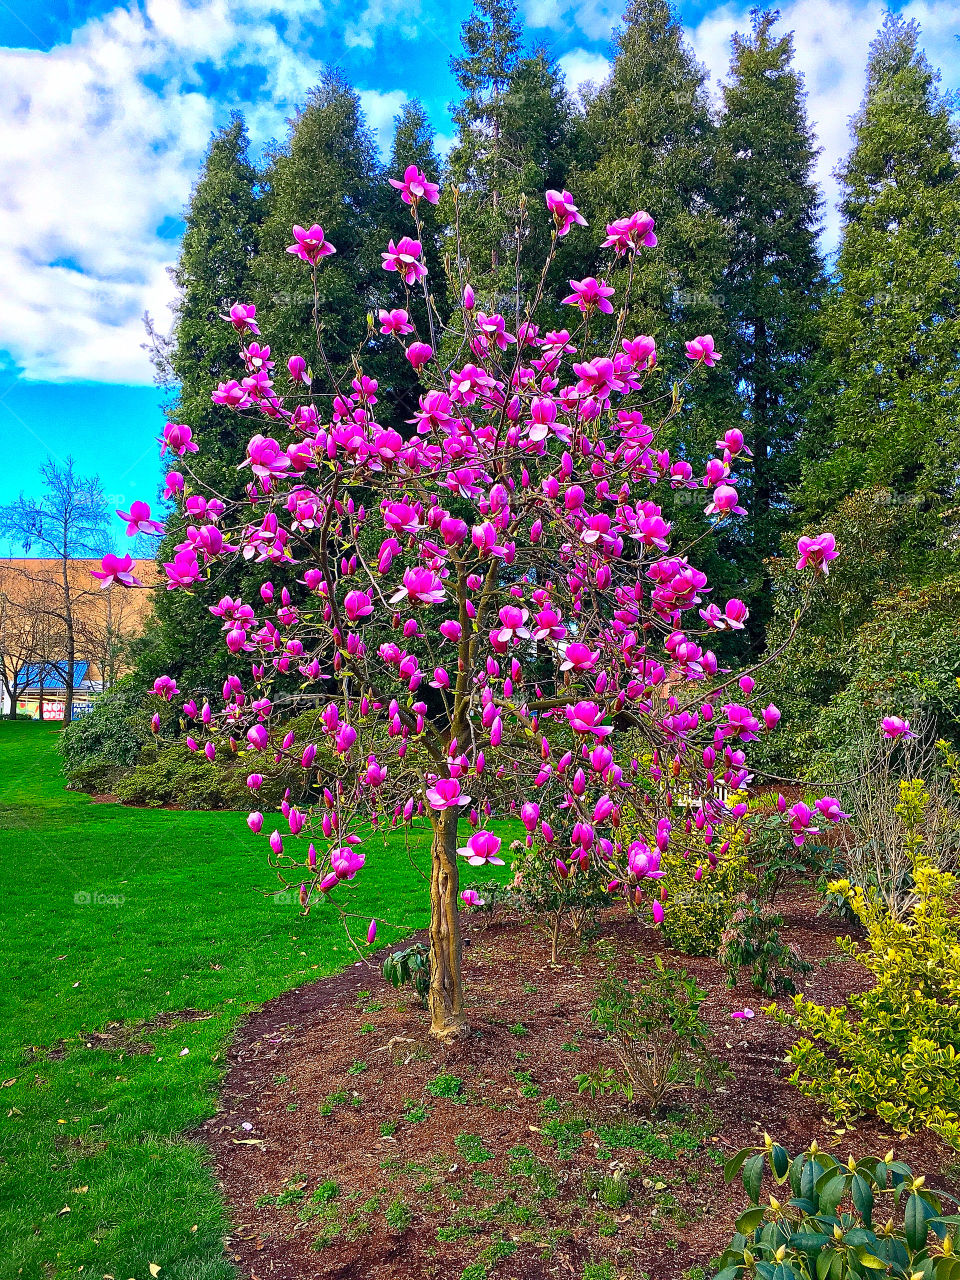 Popping purple/pink flowers on this beautiful tree on a sunny day in the park. Exquisitely colorful!